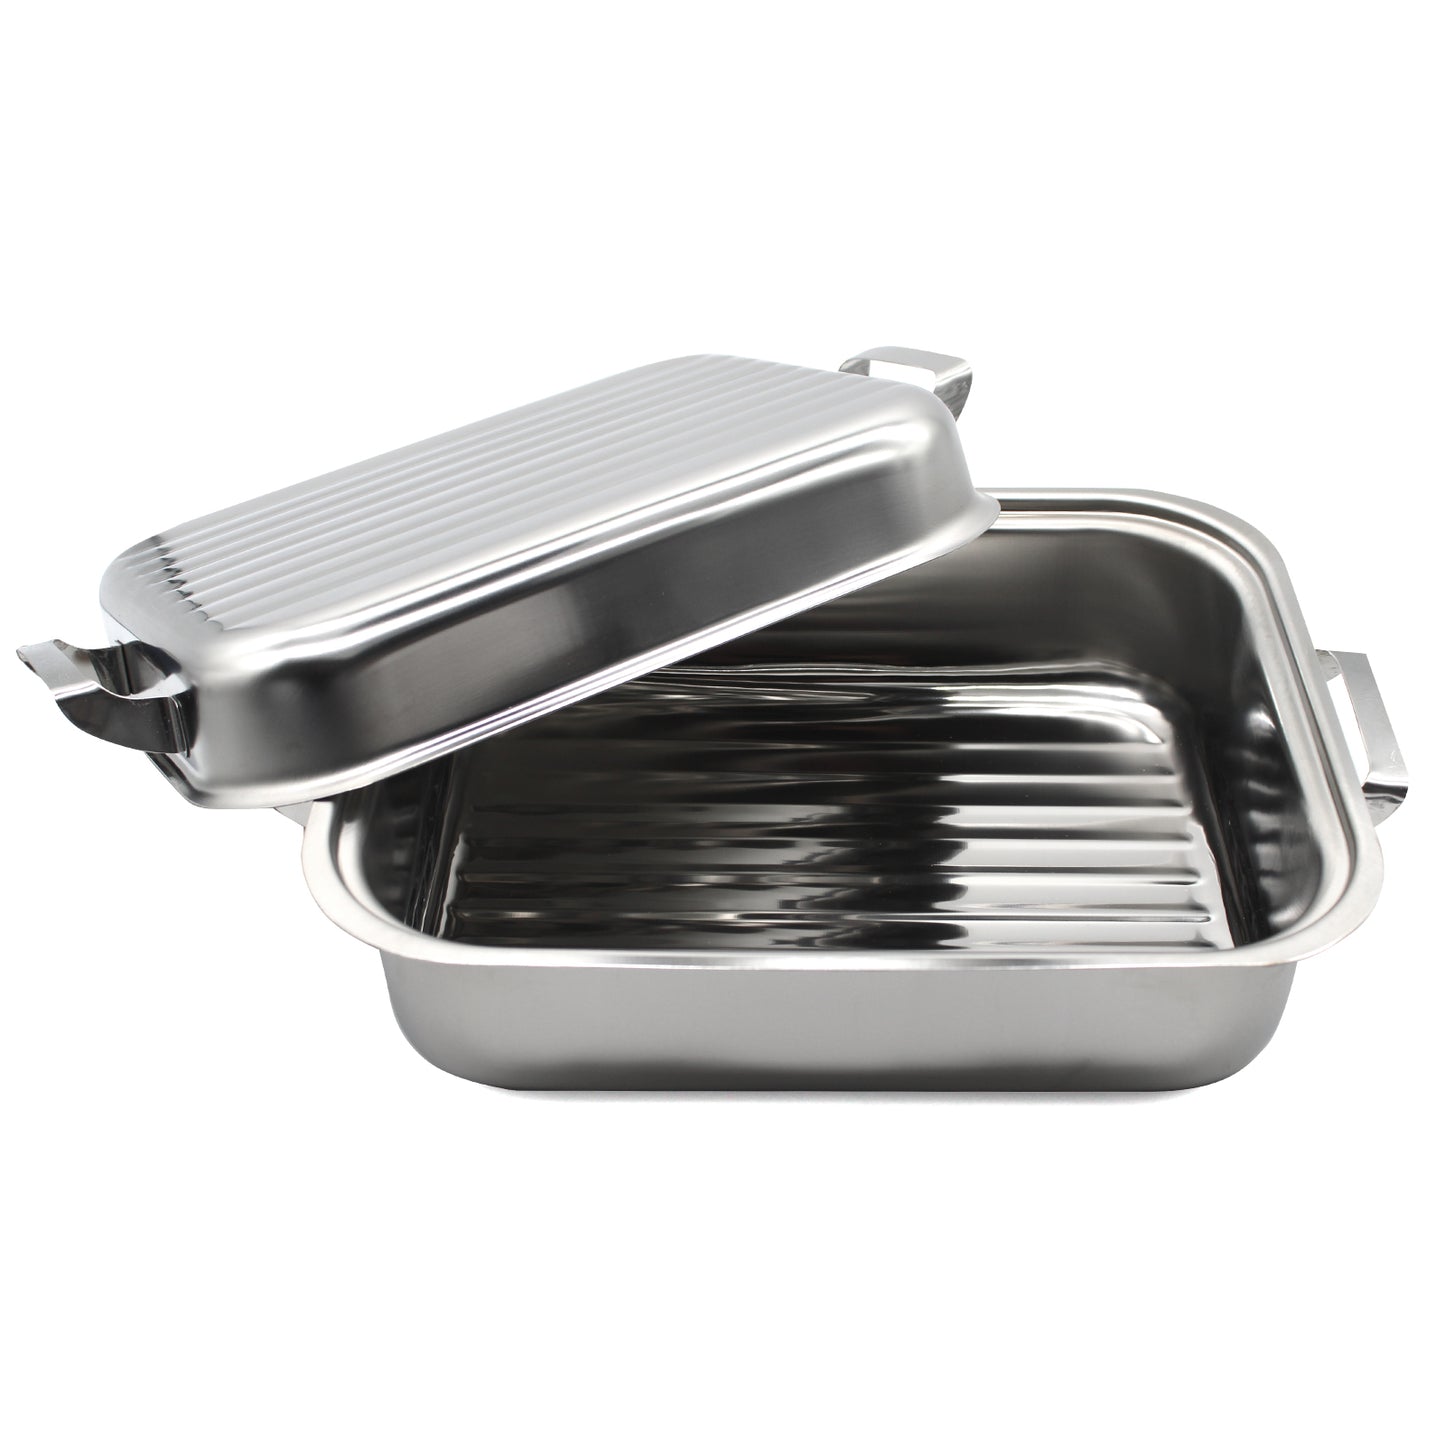 2 in 1 Stainless Steel Roasting Tray